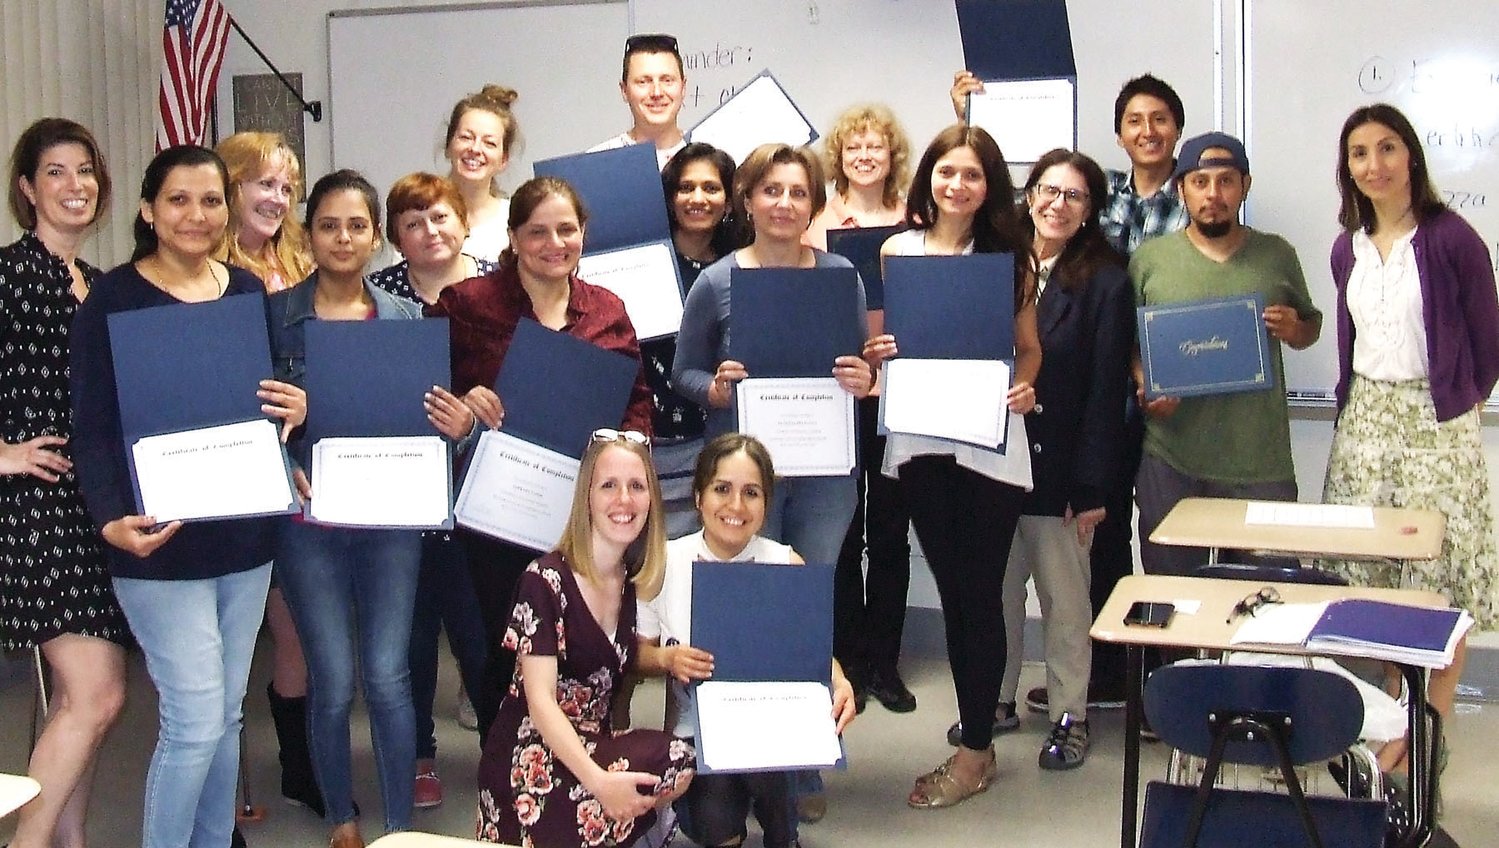 Vita staff, students, and program collaborators from Bucks County Community College celebrate students’ successful completion of Vita’s “Grow Your Own Business” integrated English literature and civics education class, which combines language learning and professional training to start or expand a business.